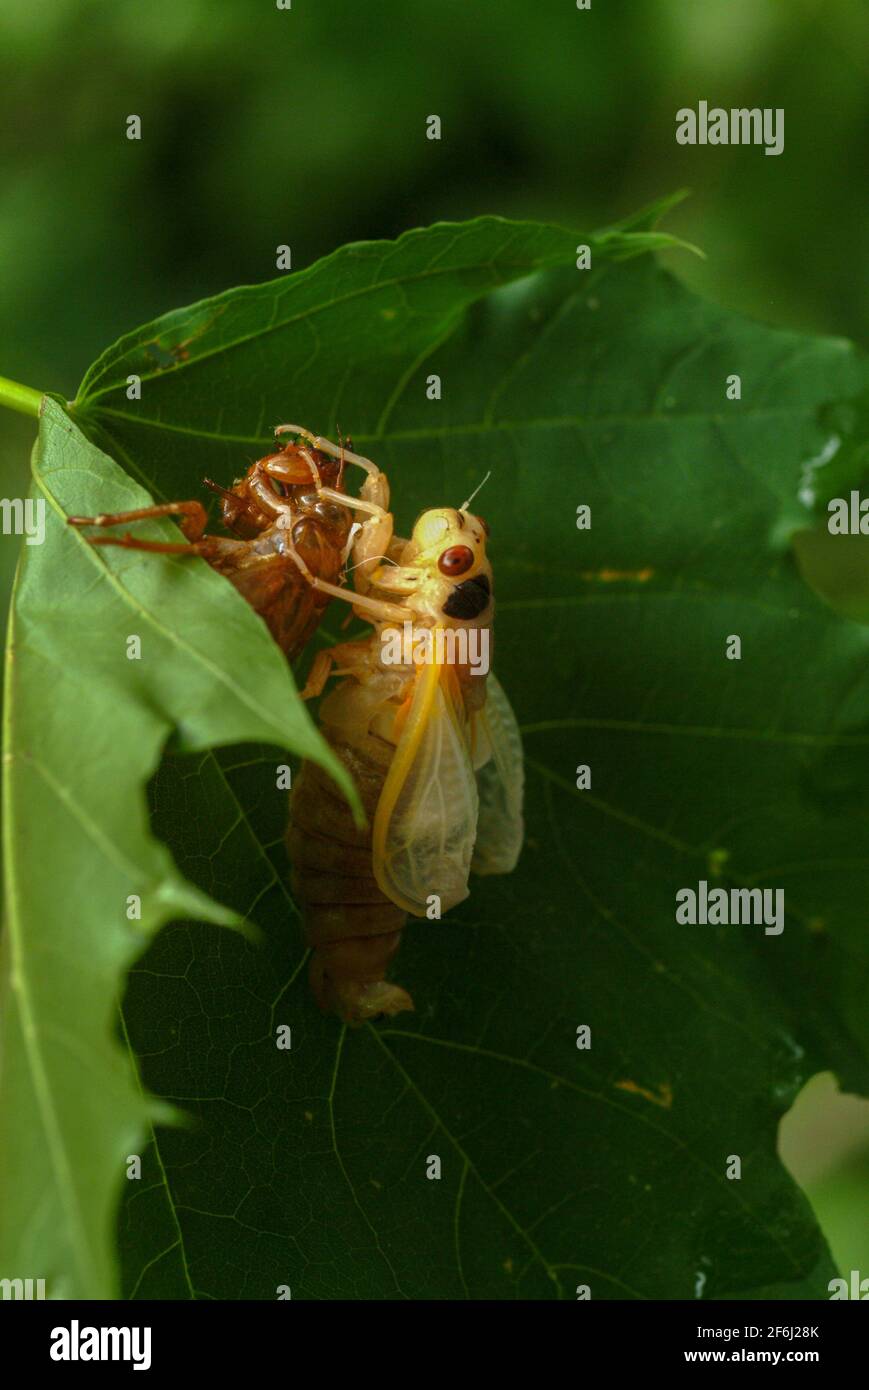 USA Maryland Insect Cicada Cicadas Cicadoidea Brood X 17 year cicada emerges from the ground to reproduce Stock Photo